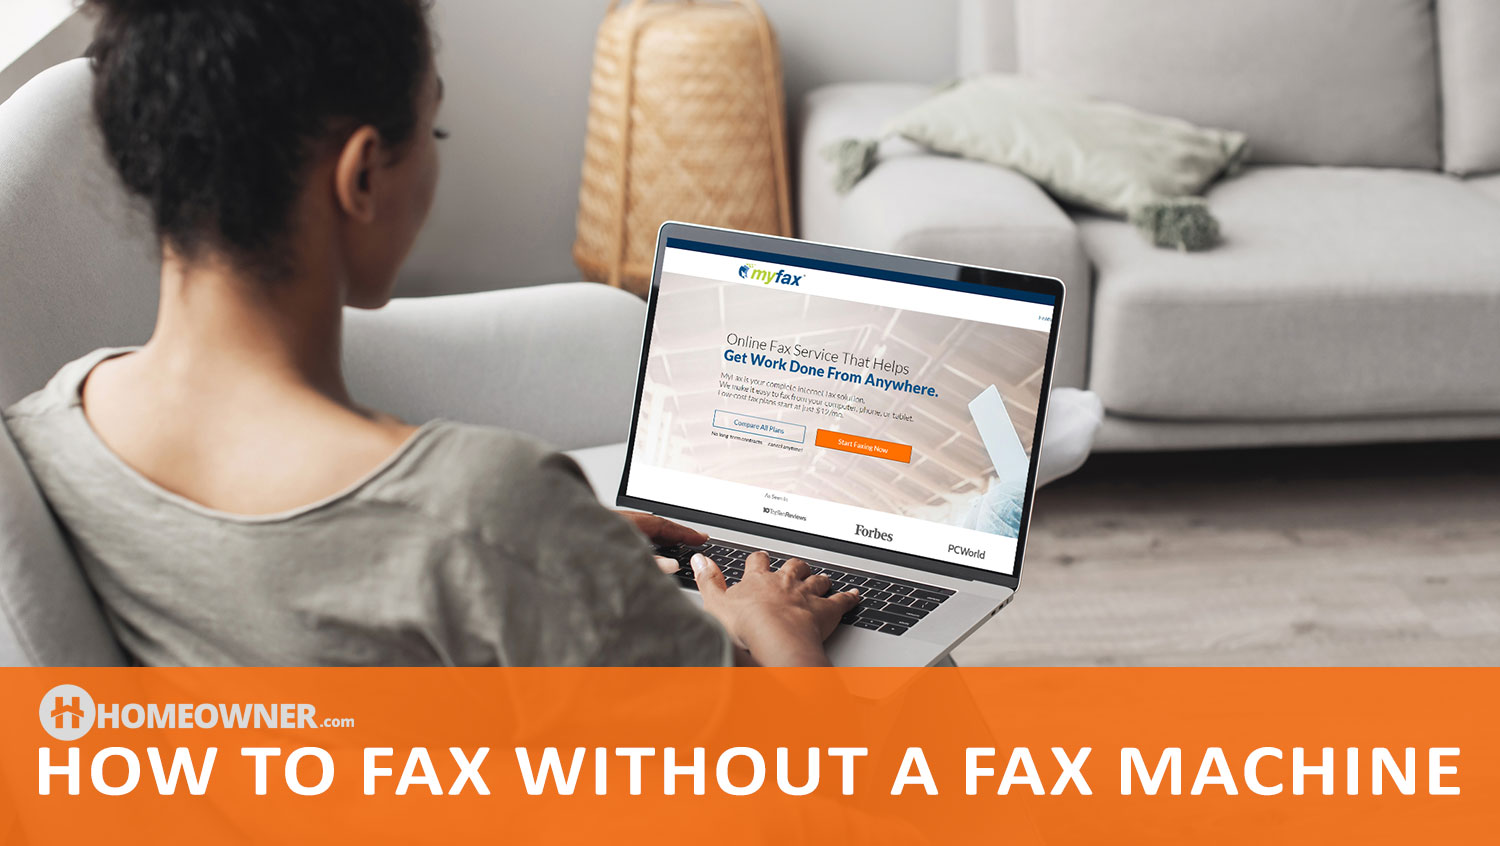 How To Fax Without a Fax Machine